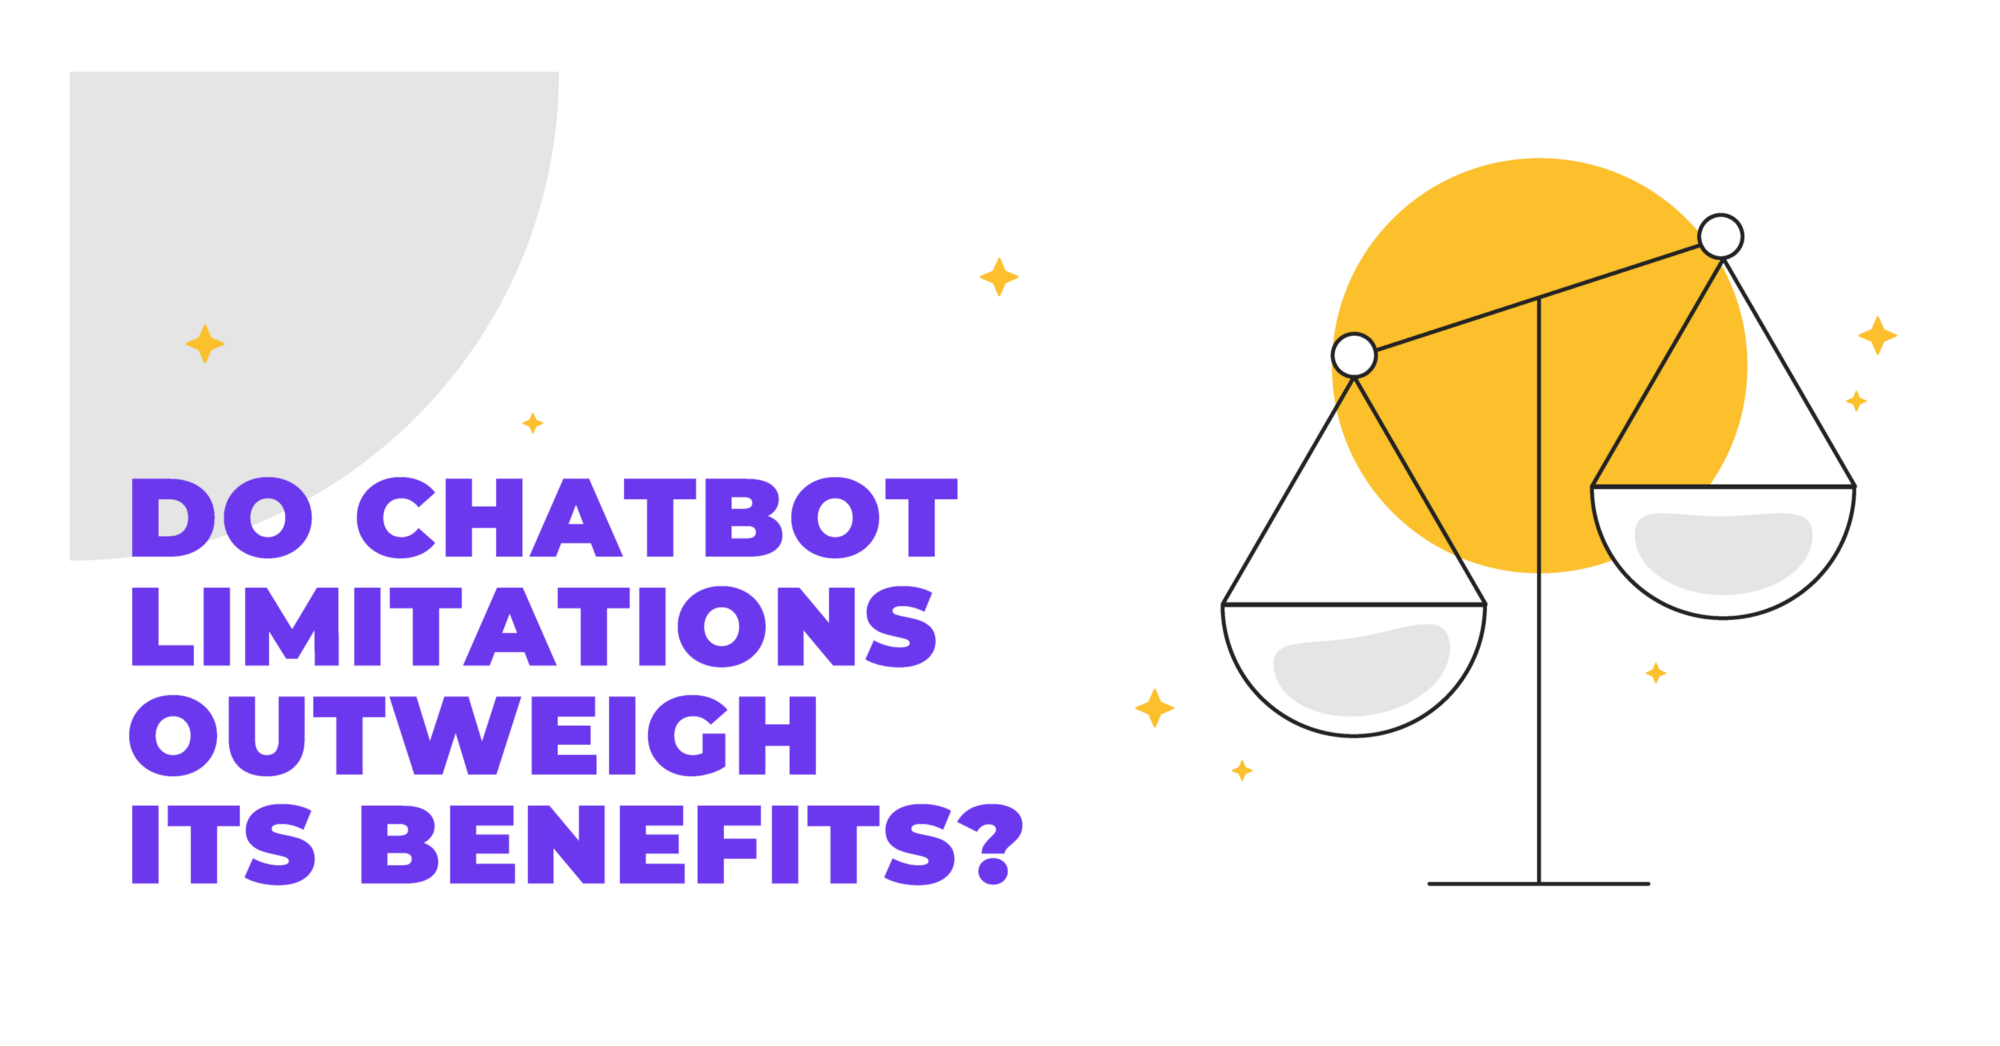 The Limitations of Chatbots: Do They Outweigh The Benefits?